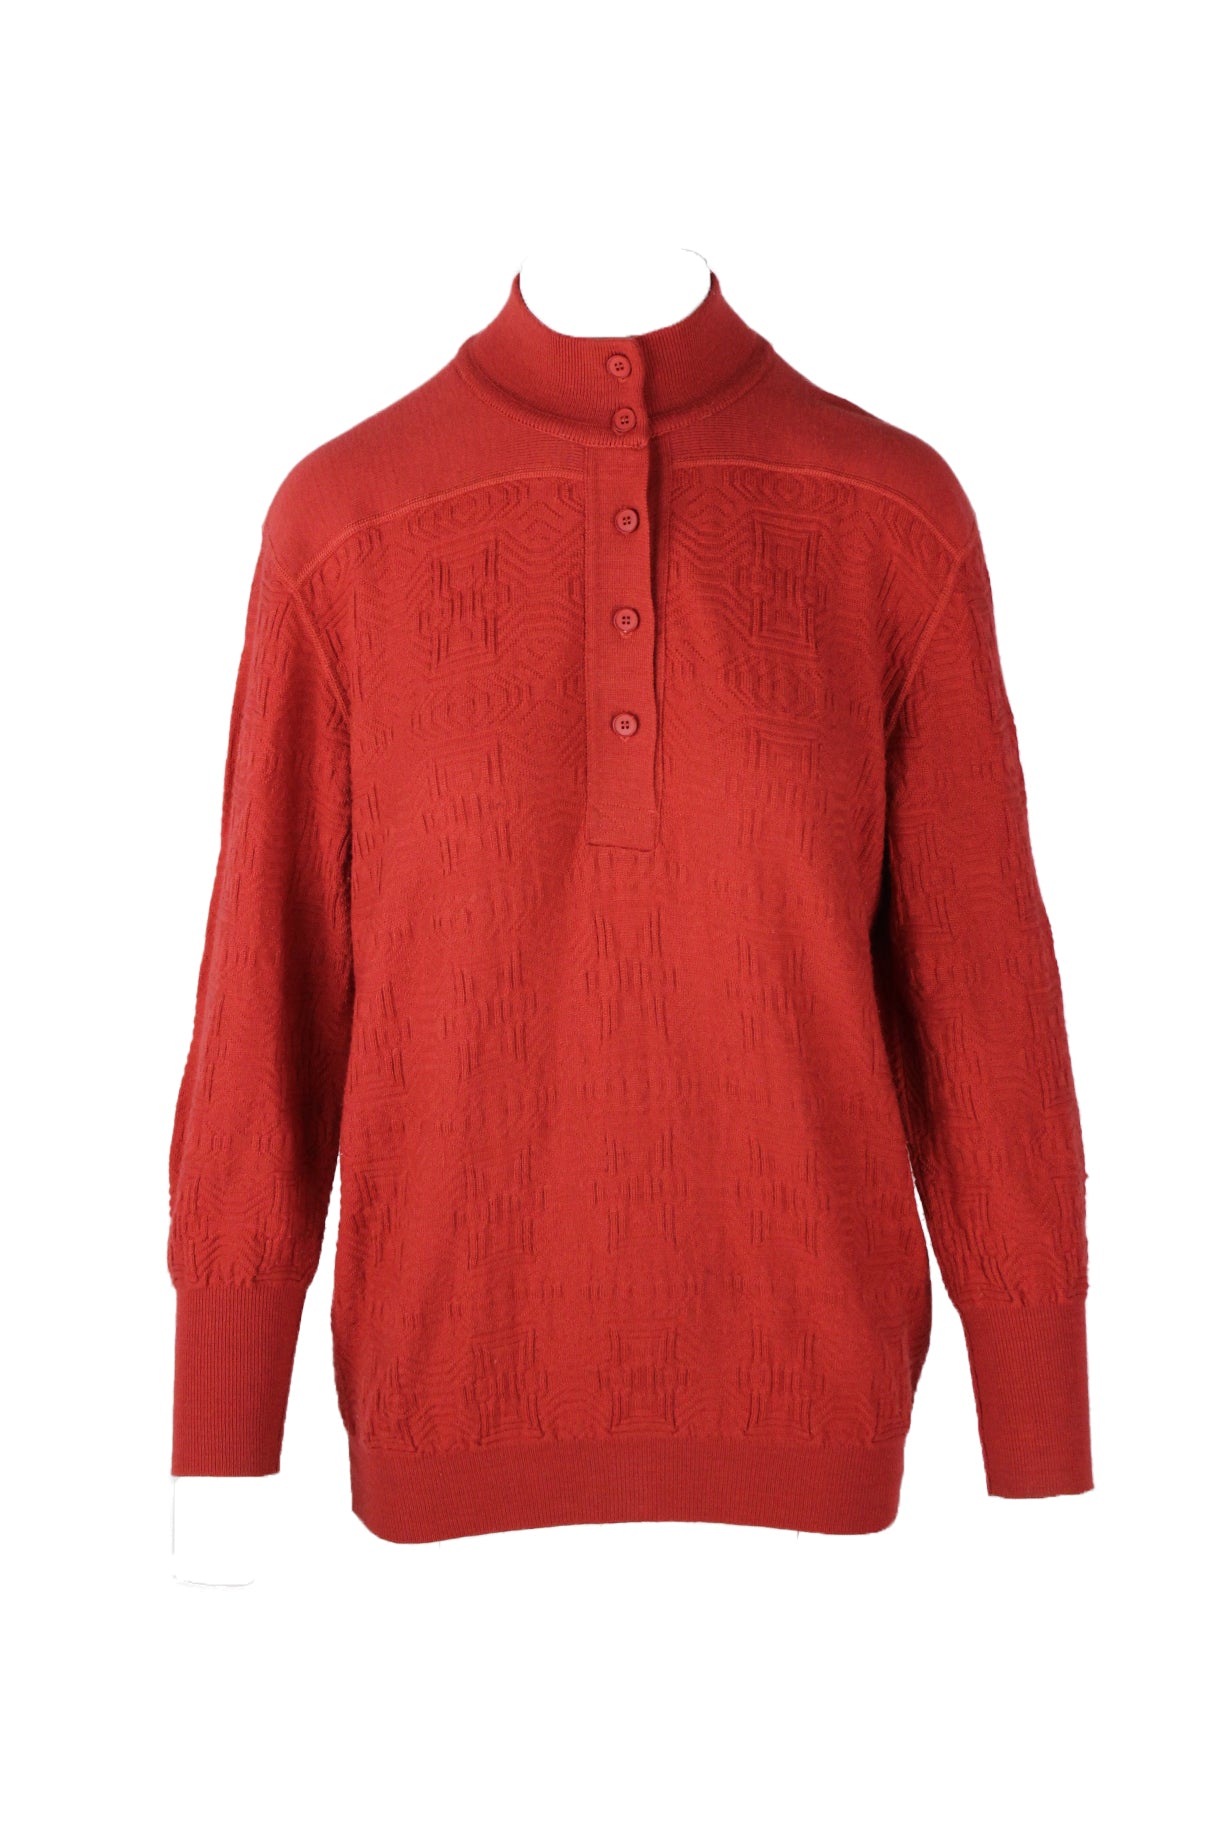 front angle of vintage courreges rusty red pull-over sweater. features mock-turtleneck, five button half placket, patterned small knit throughout, and long ribbed cuffs/hem. 